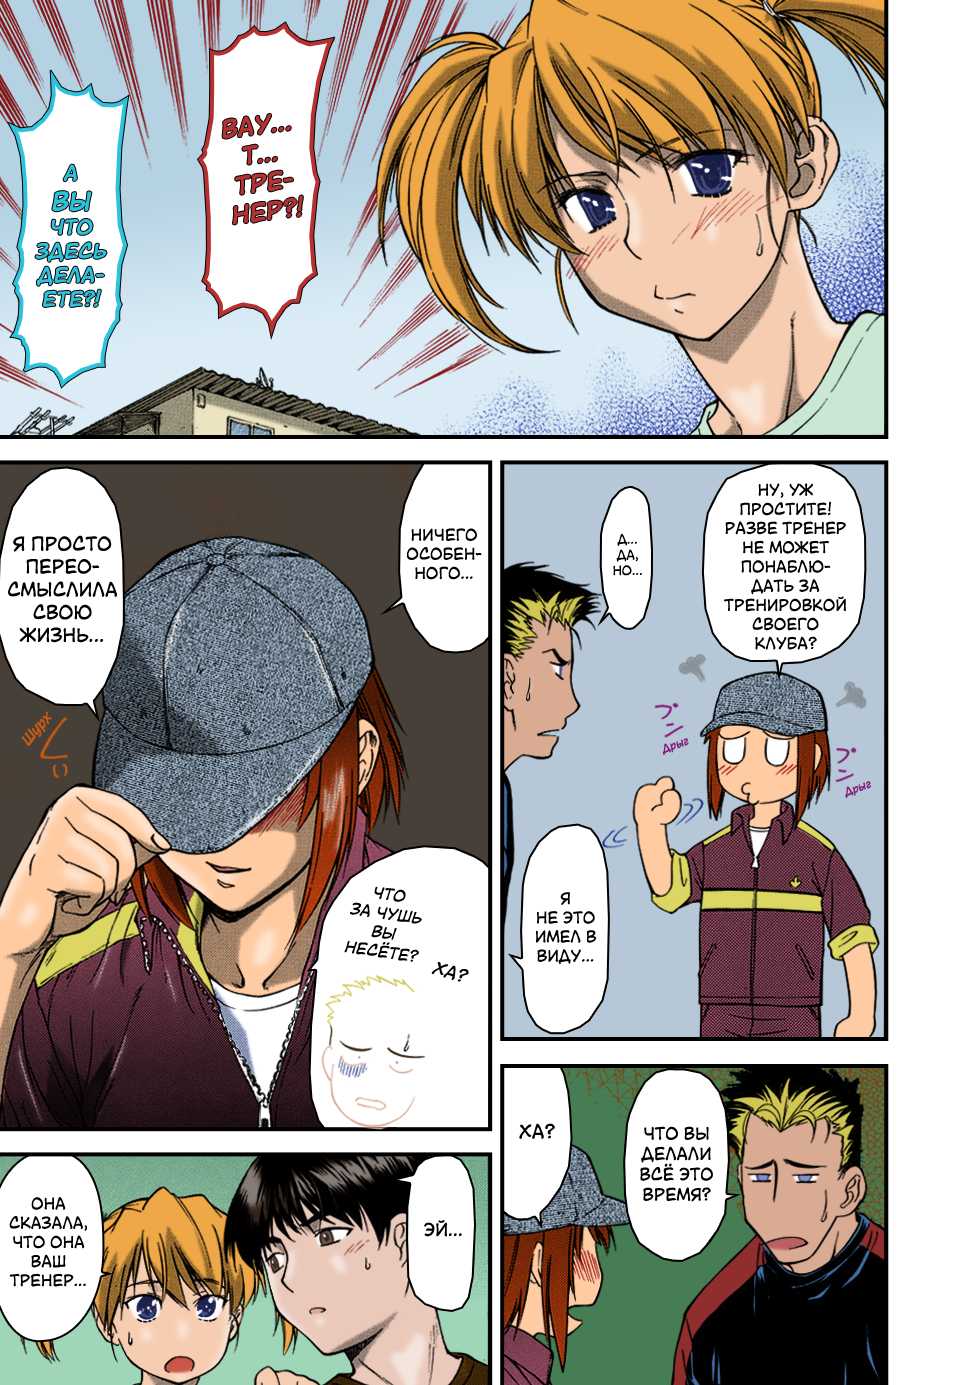 [Nagare Ippon] Offside Girl Ch. 1-5 [Russian] [Colorized] [Decensored] [WIP] - Page 36